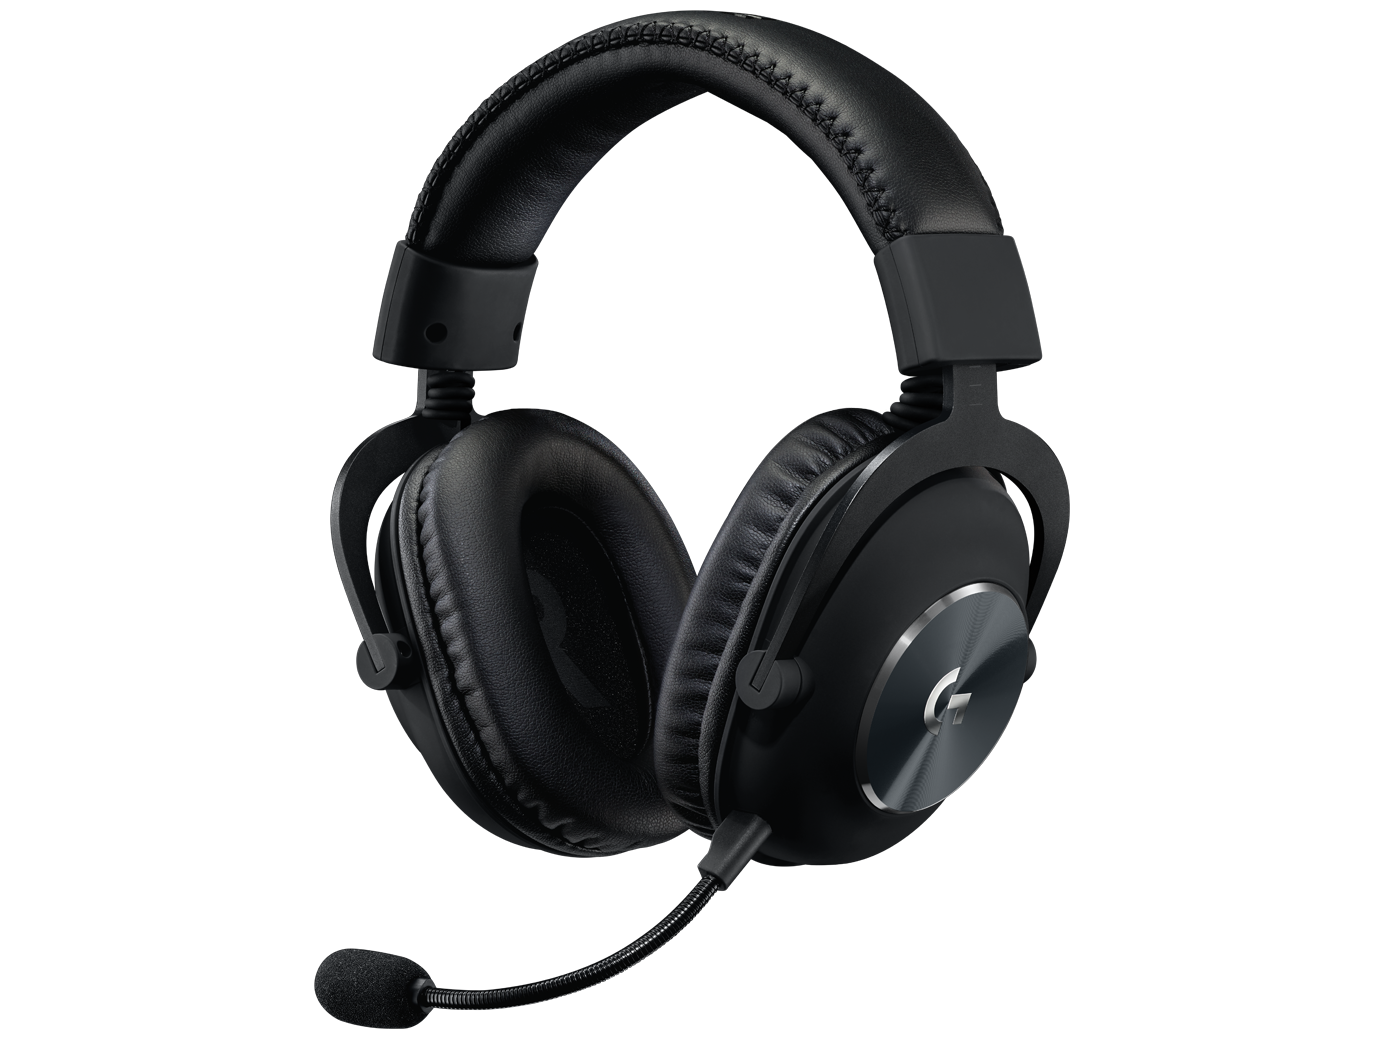 Logitech PRO Gaming Headset with Passive Noise